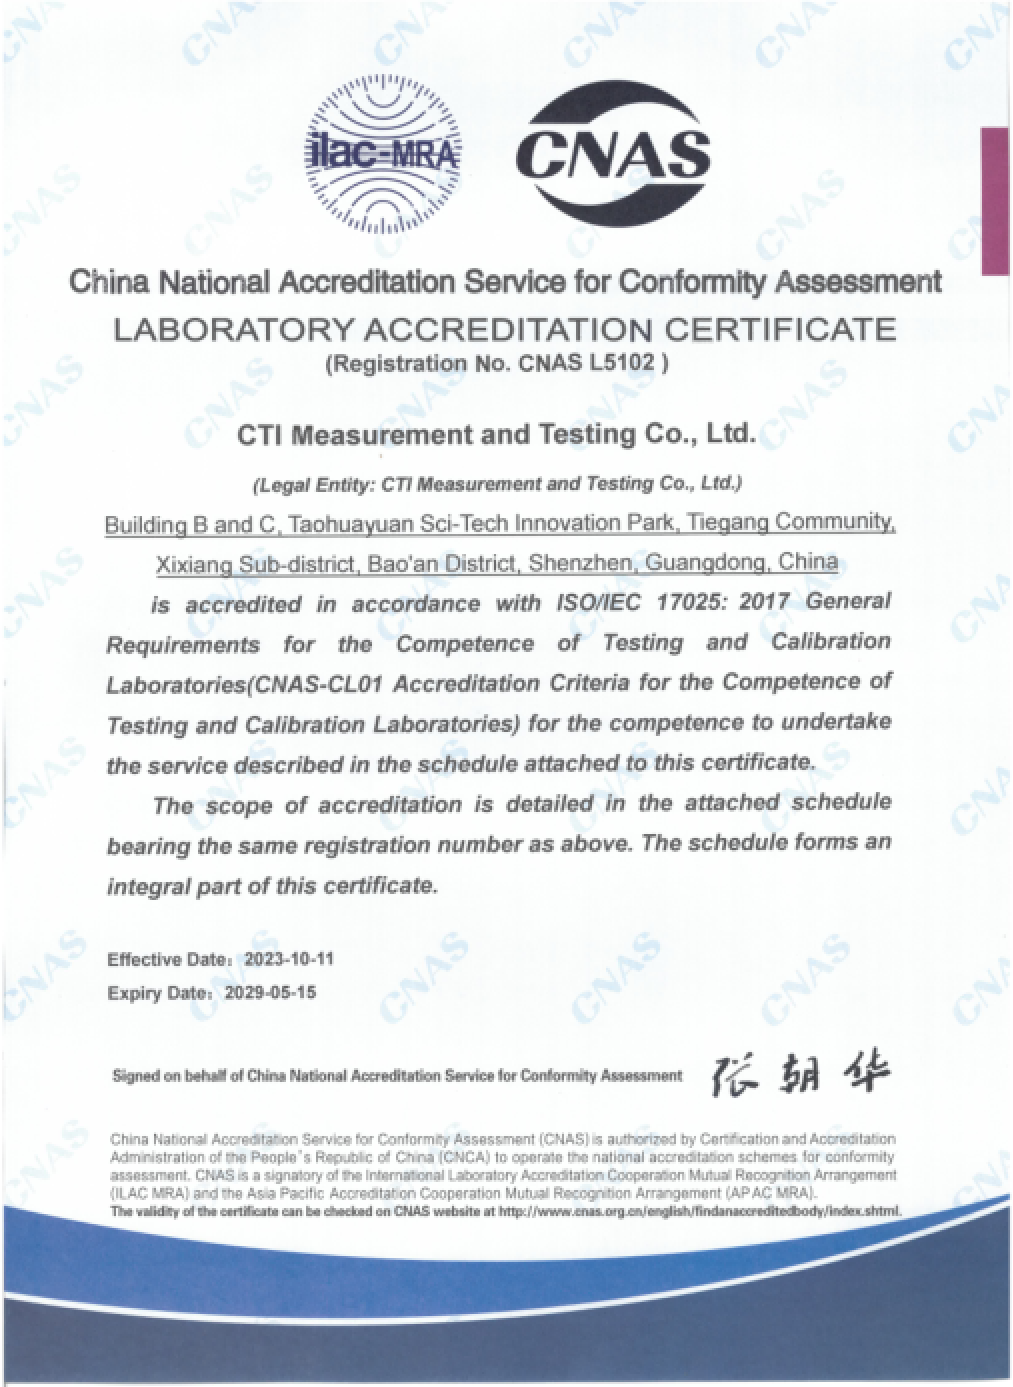 CNAS (ISO 17025: 2017) Certificate for CTI Measurement and Testing